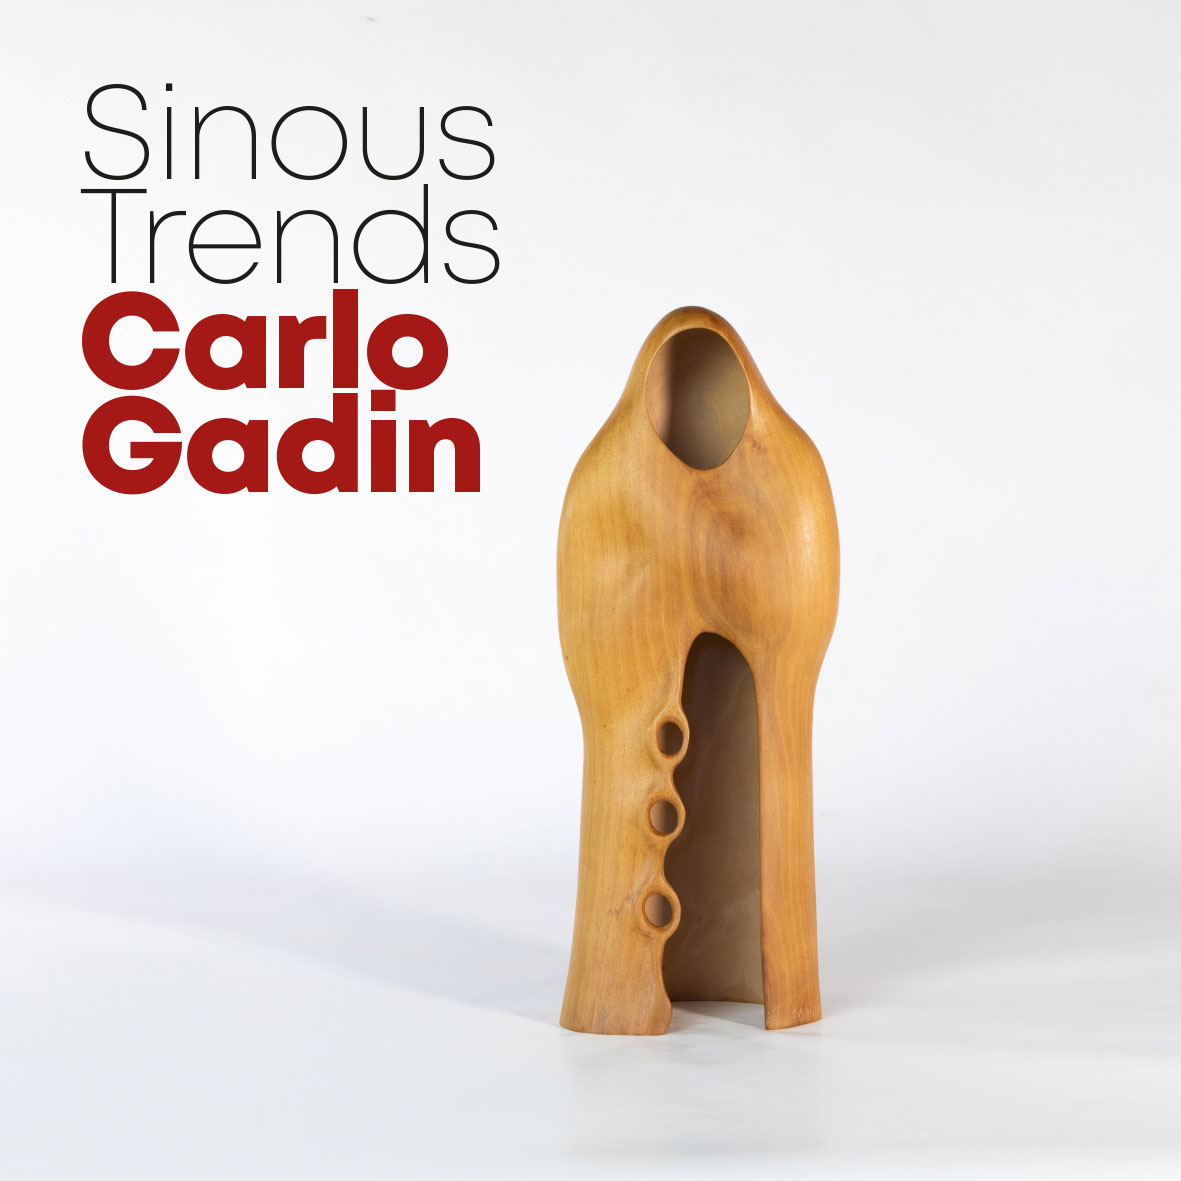 Exhibition of Carlo Gadin’s work  - Sinuous Trends